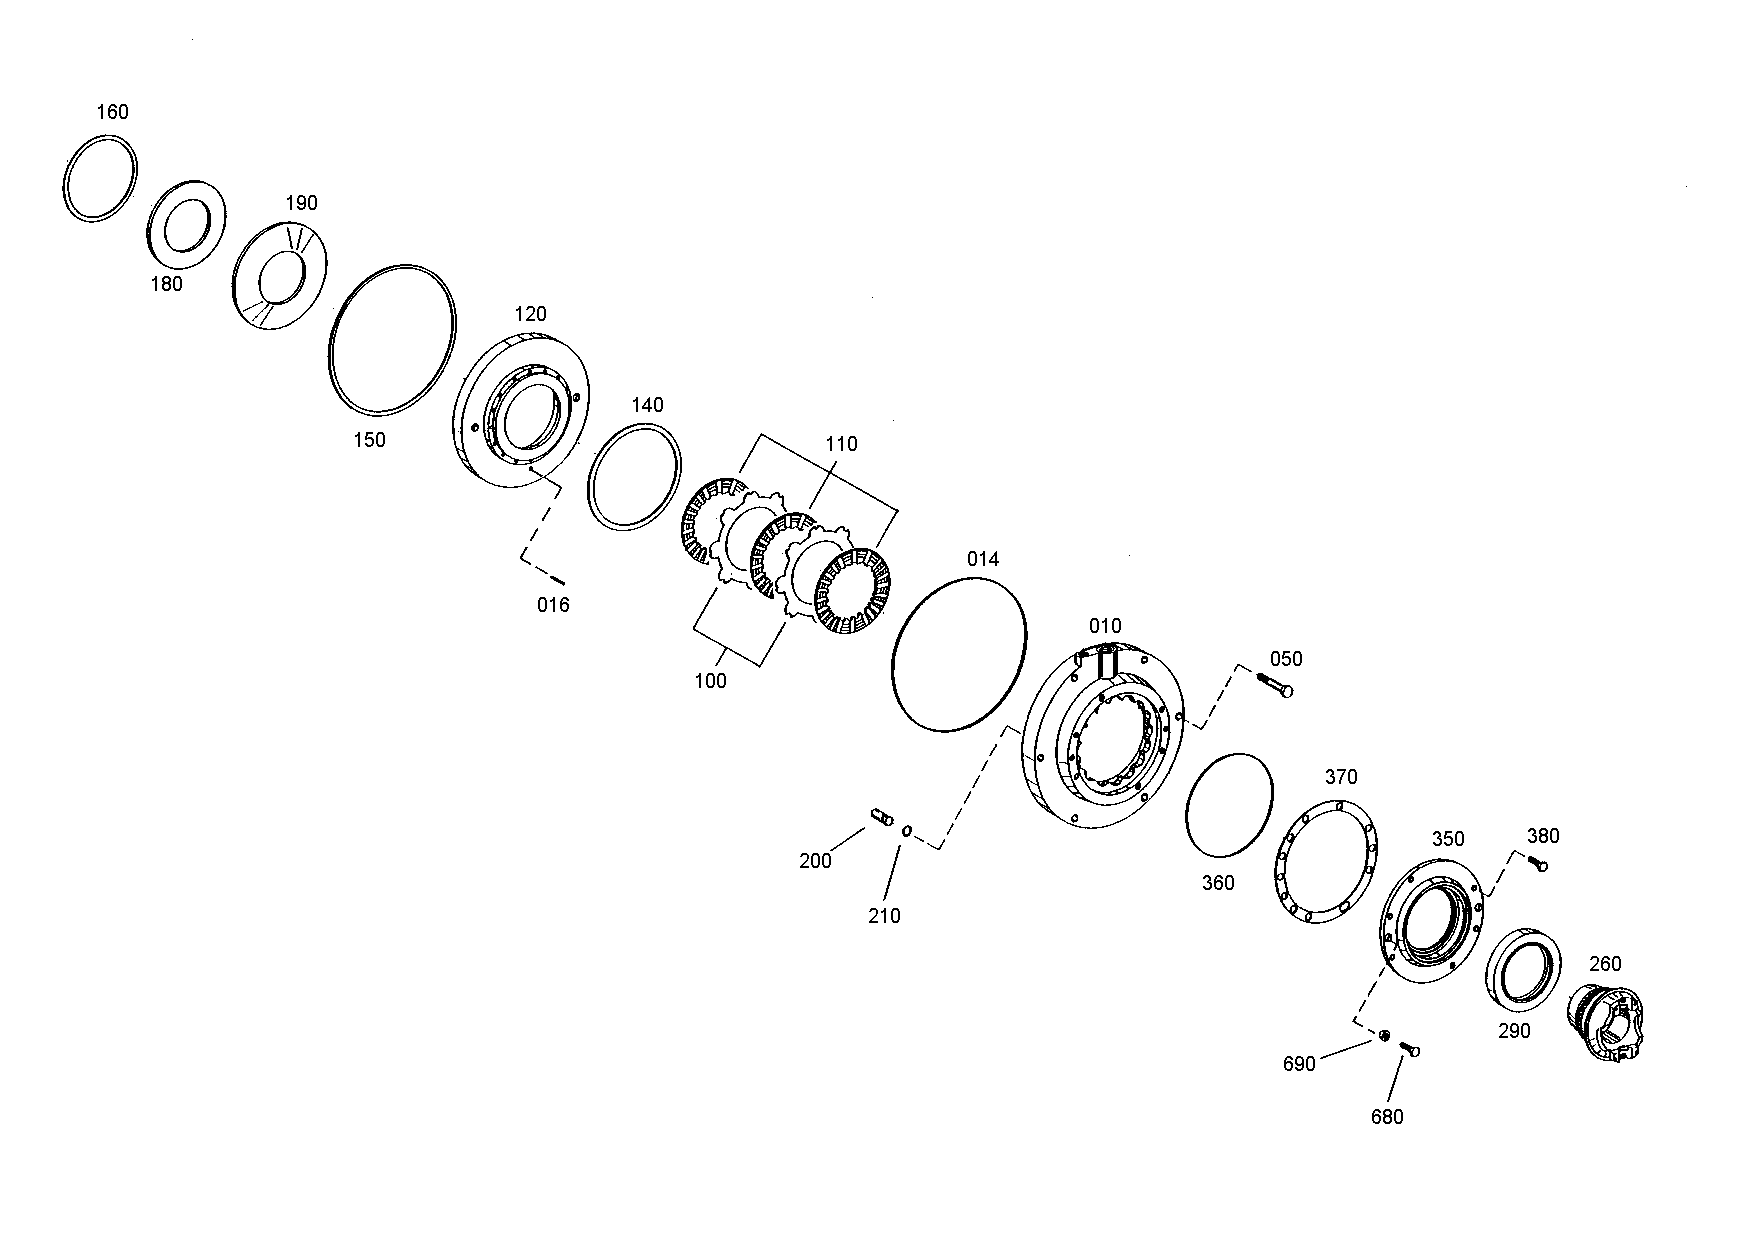 drawing for CAMECO T159485 - CUP SPRING (figure 2)